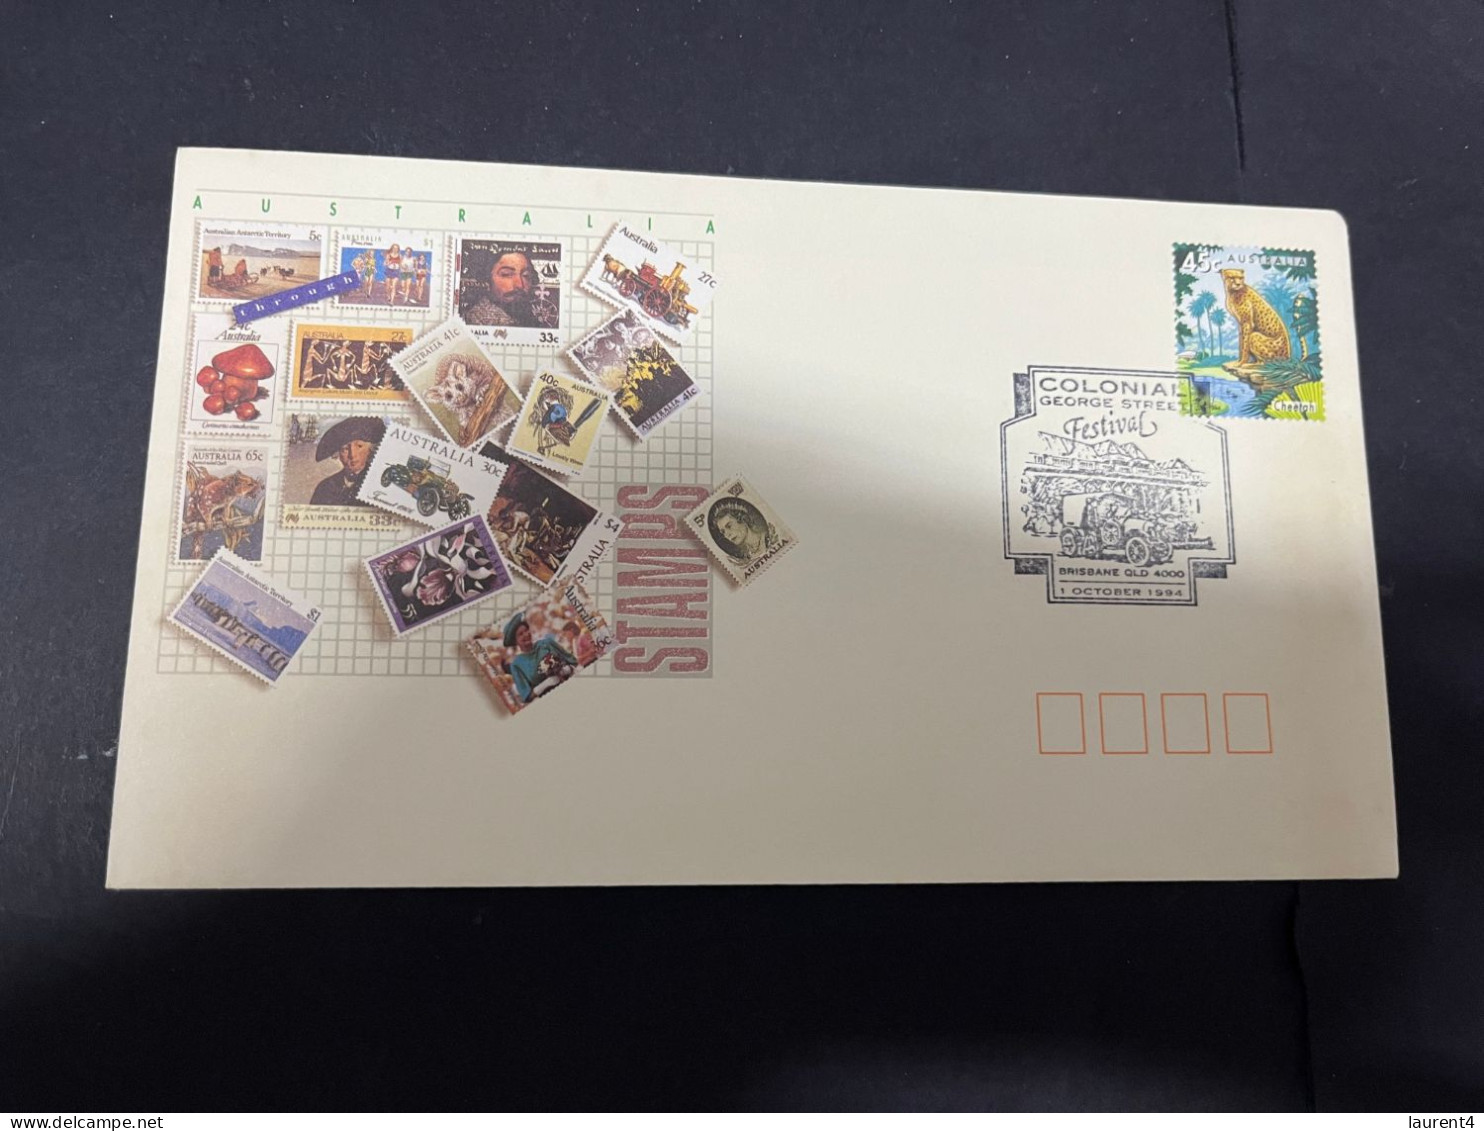 23-3-2024 (3 Y 49) Australia FDC - With Cheetah [big Cat] Stamp - Brisbane Colonial Festival Postmark (1994) - Other (Earth)